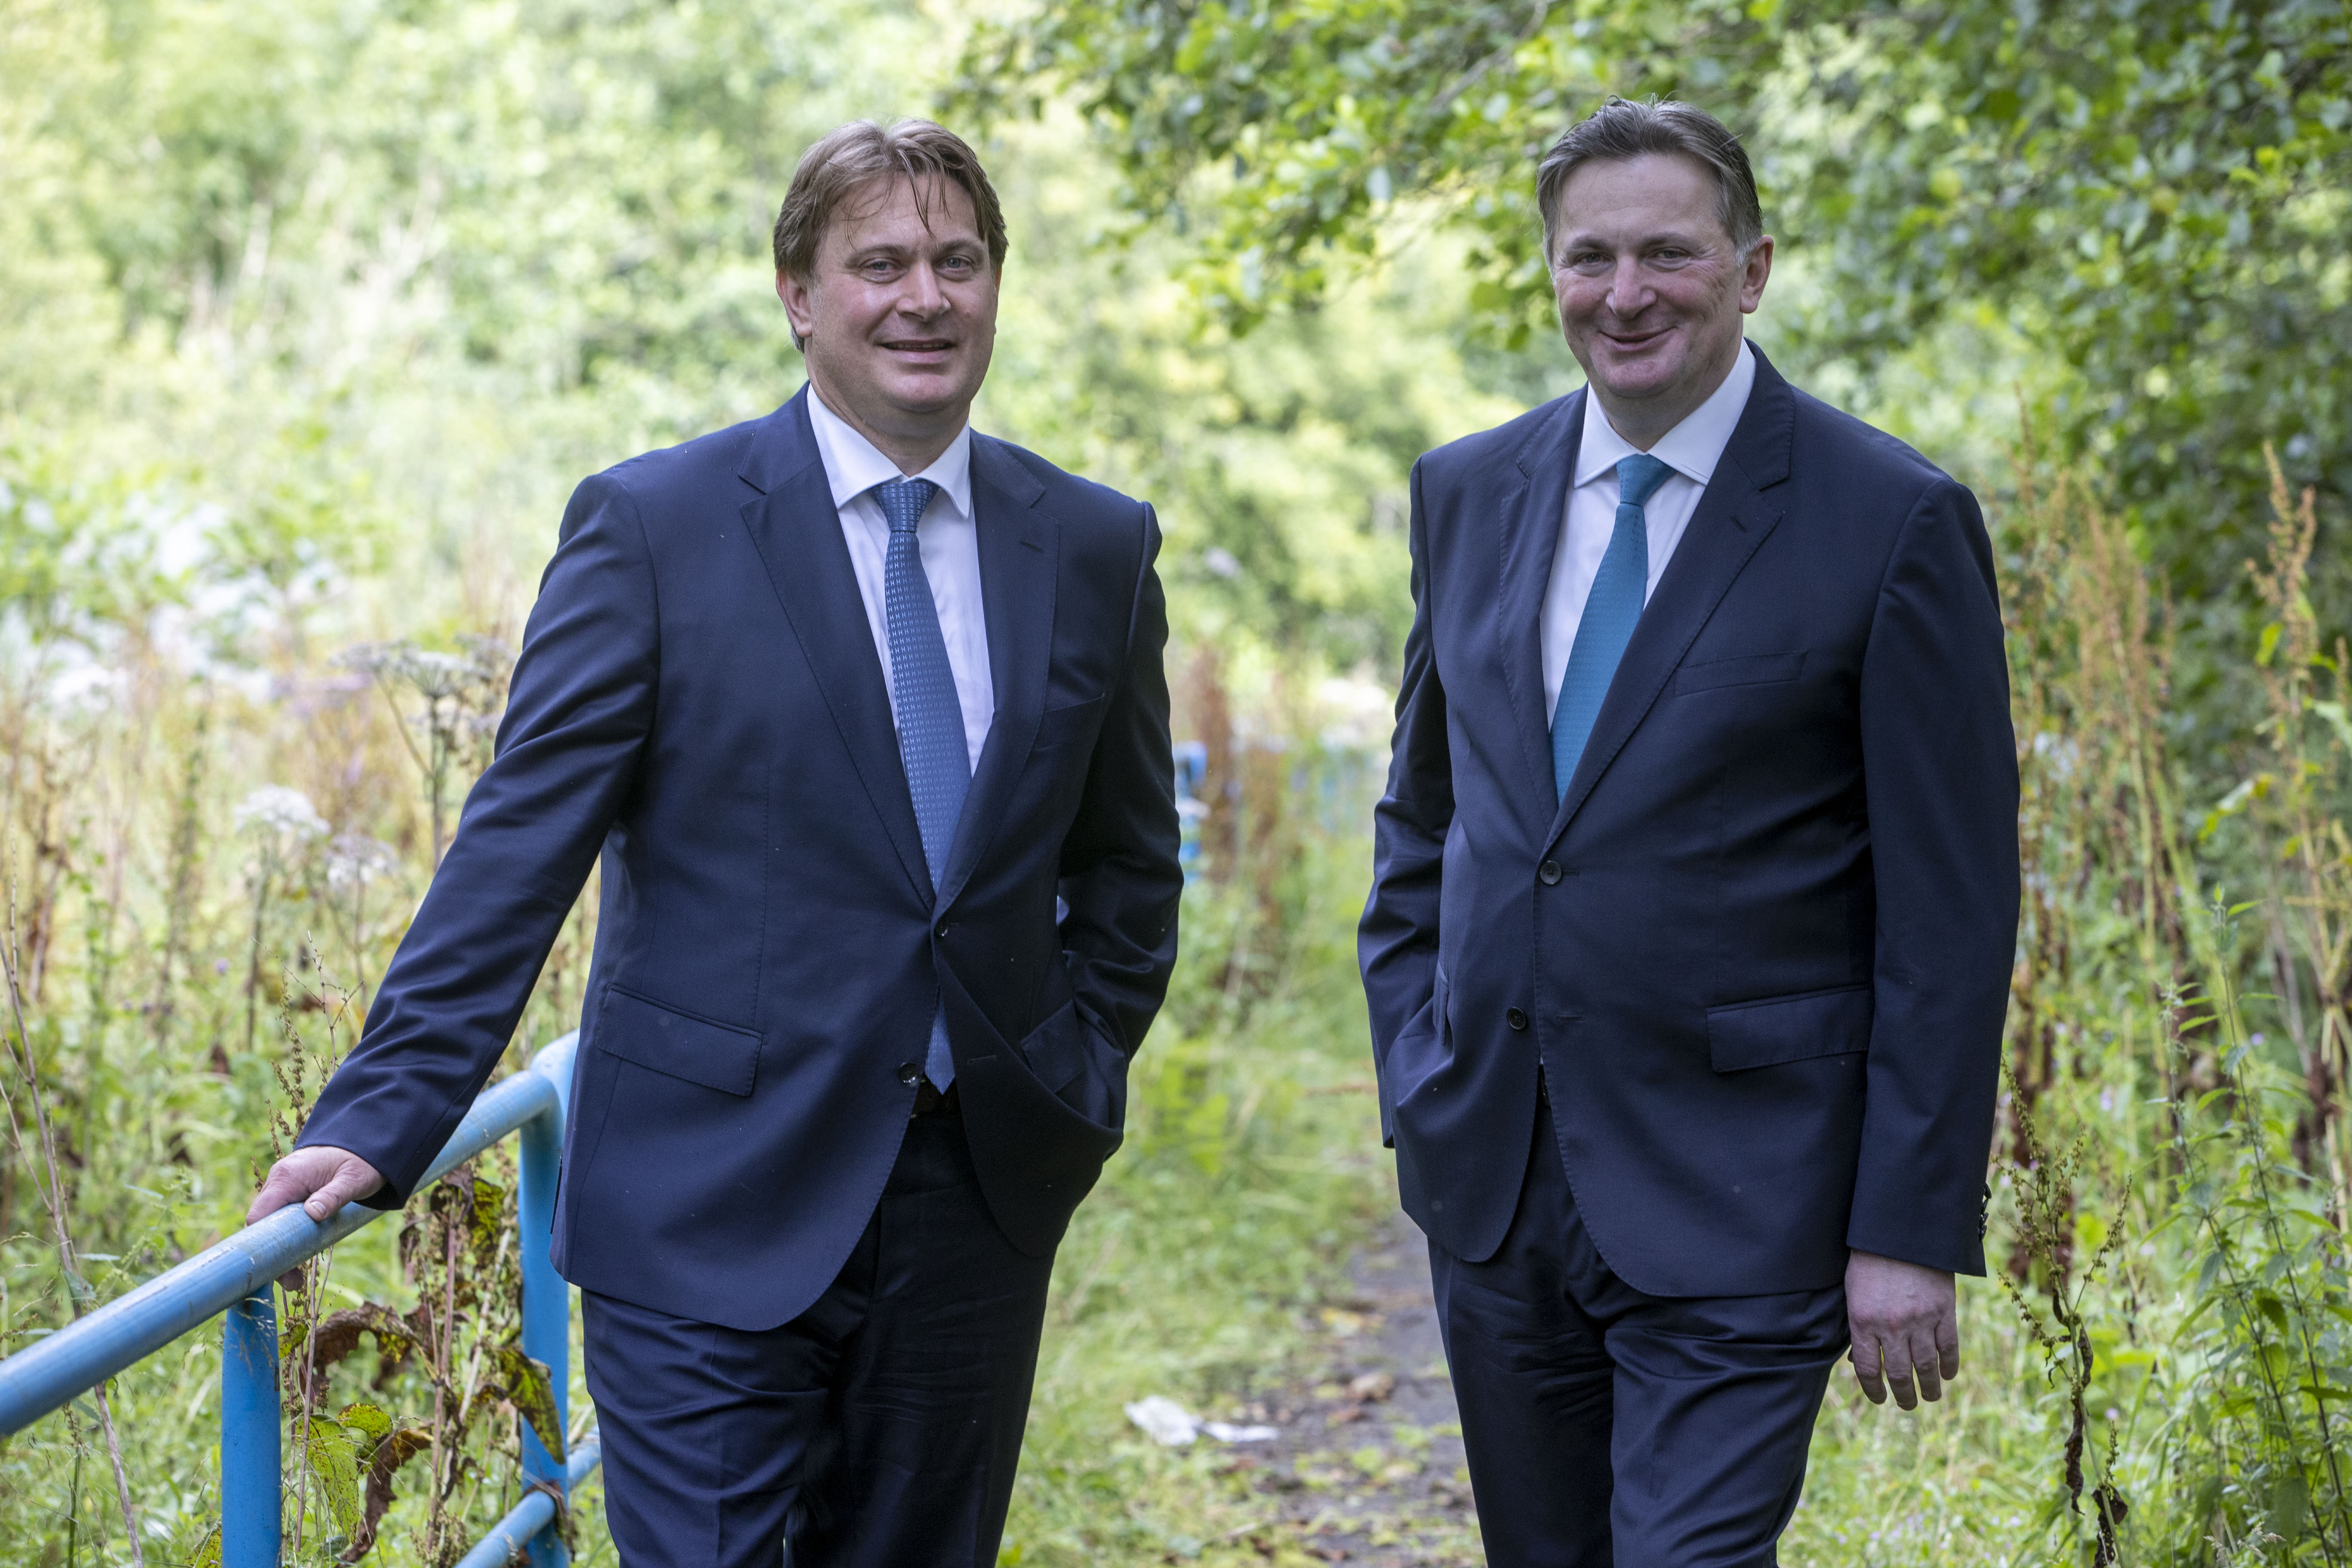 Easdale Investment Group breathes new life into old Tate and Lyle site with £15m housing project